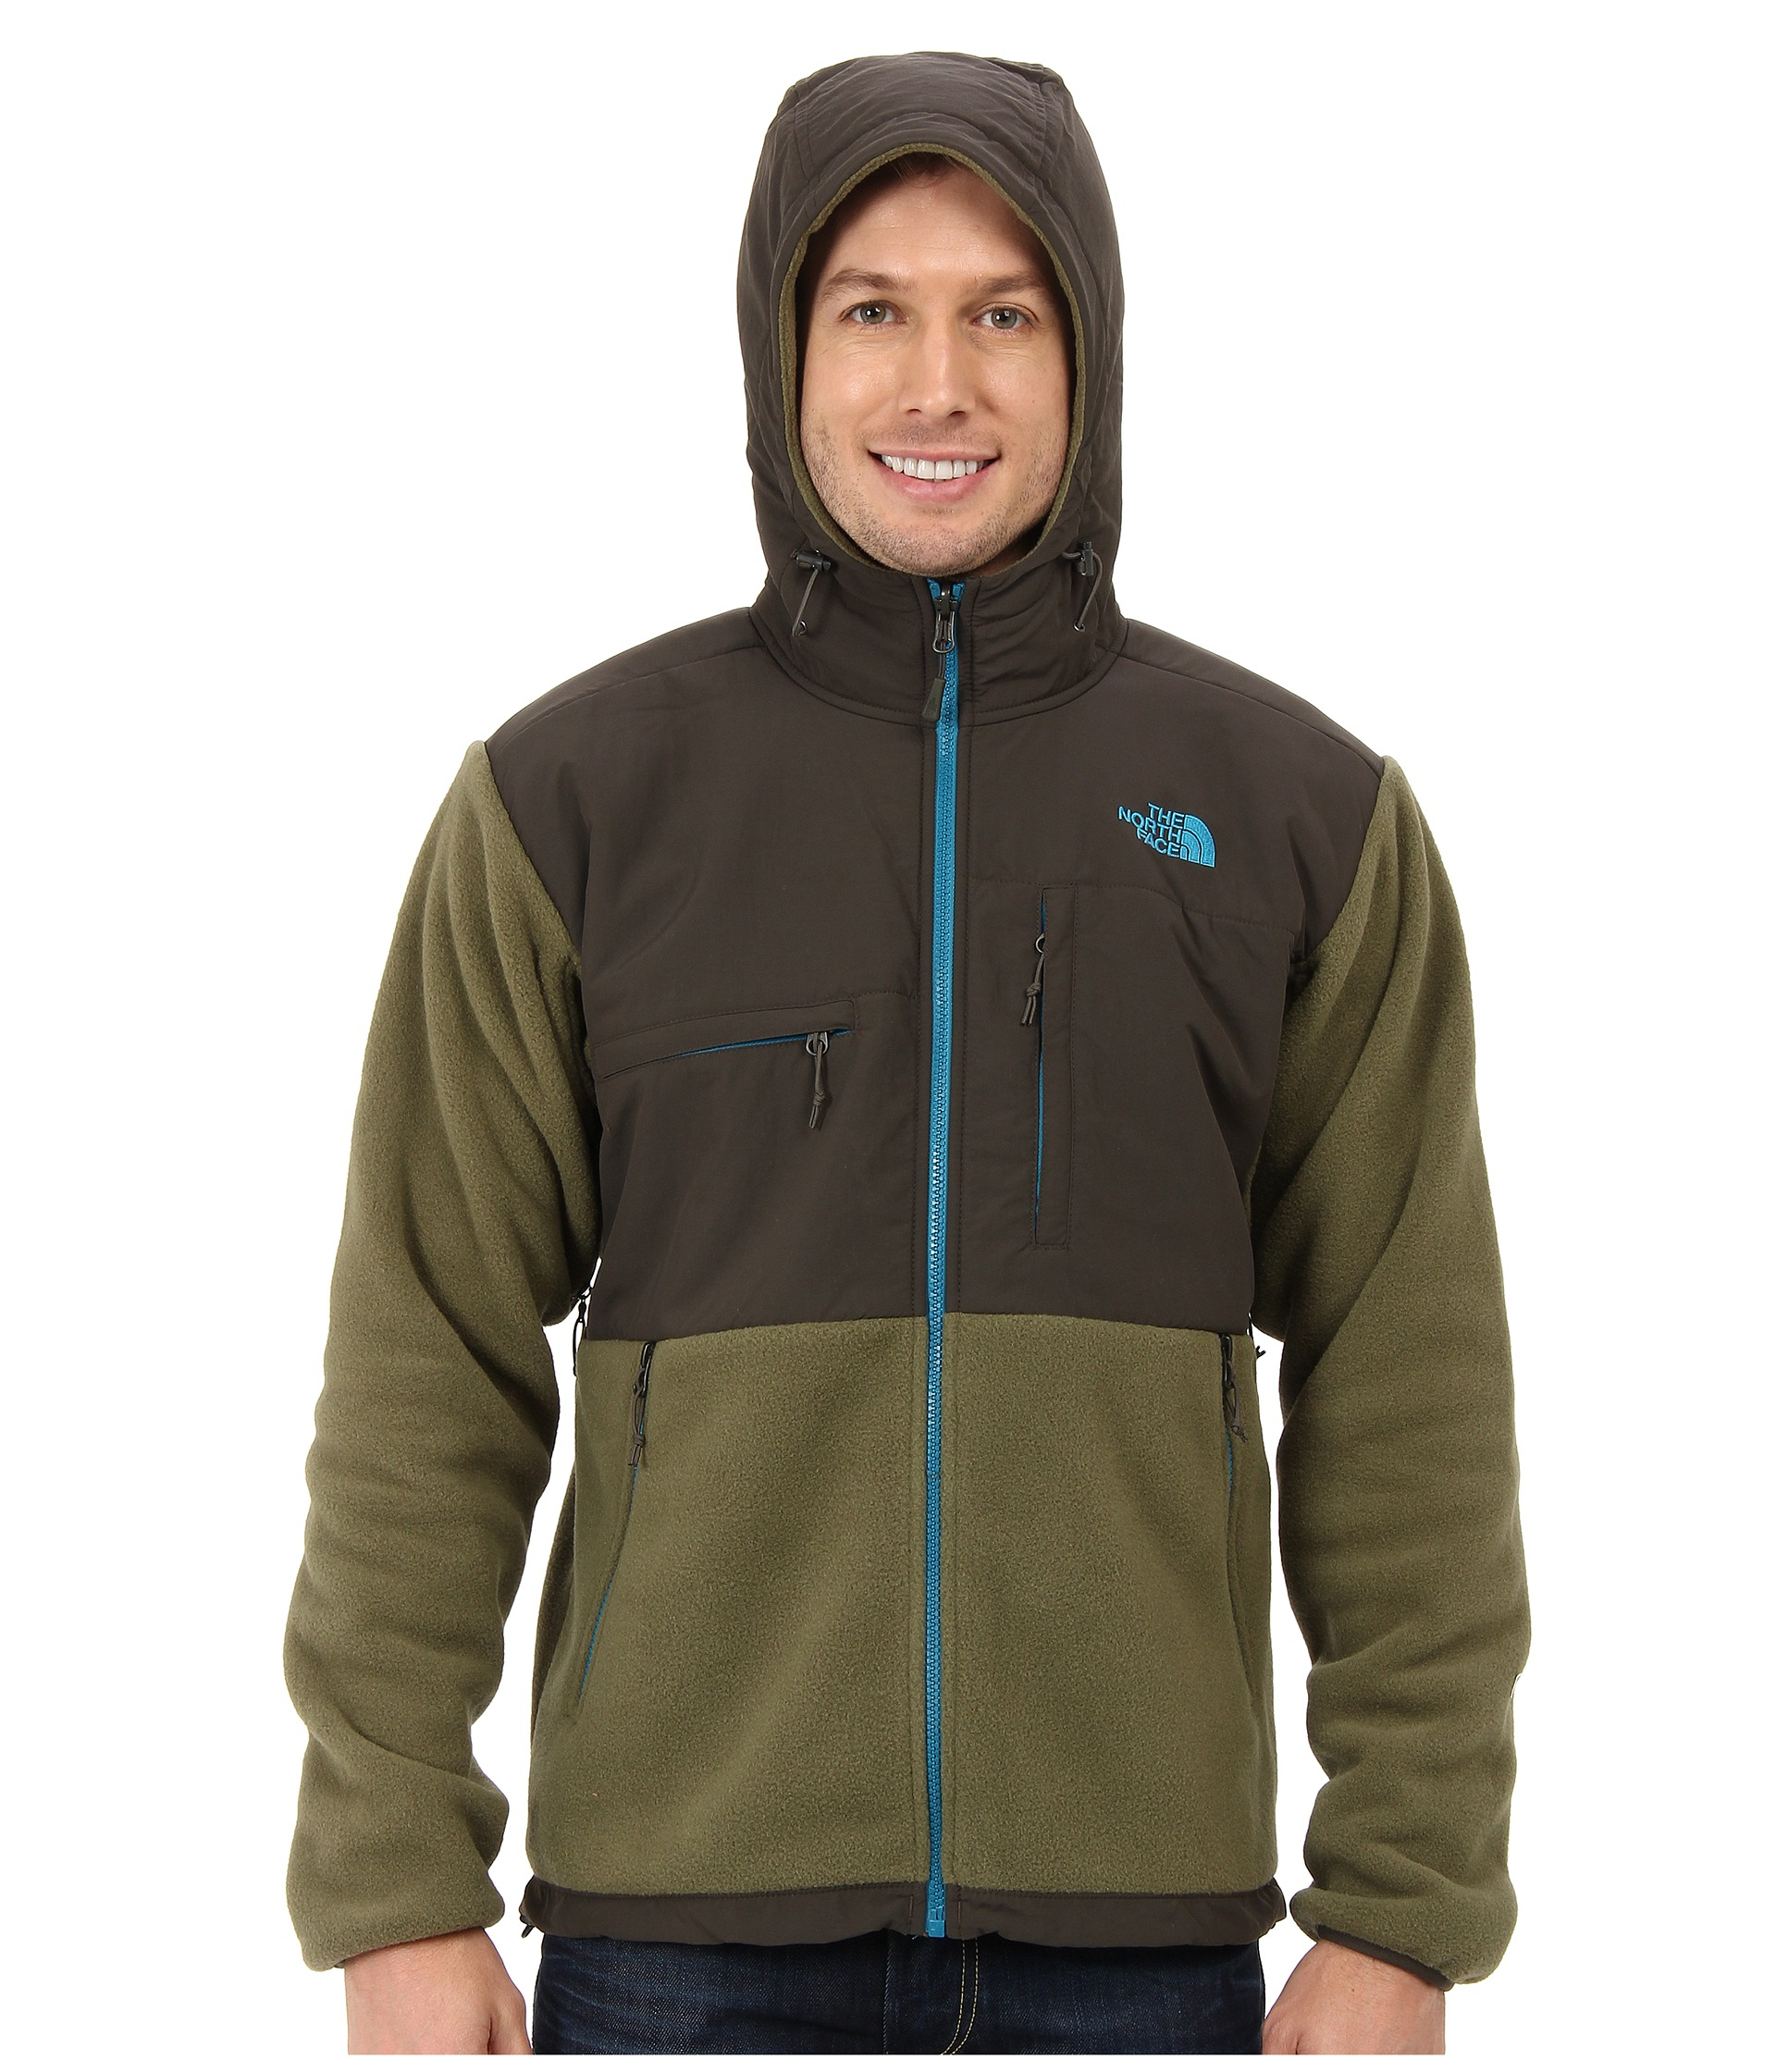 Lyst - The North Face Denali Hoodie in Green for Men